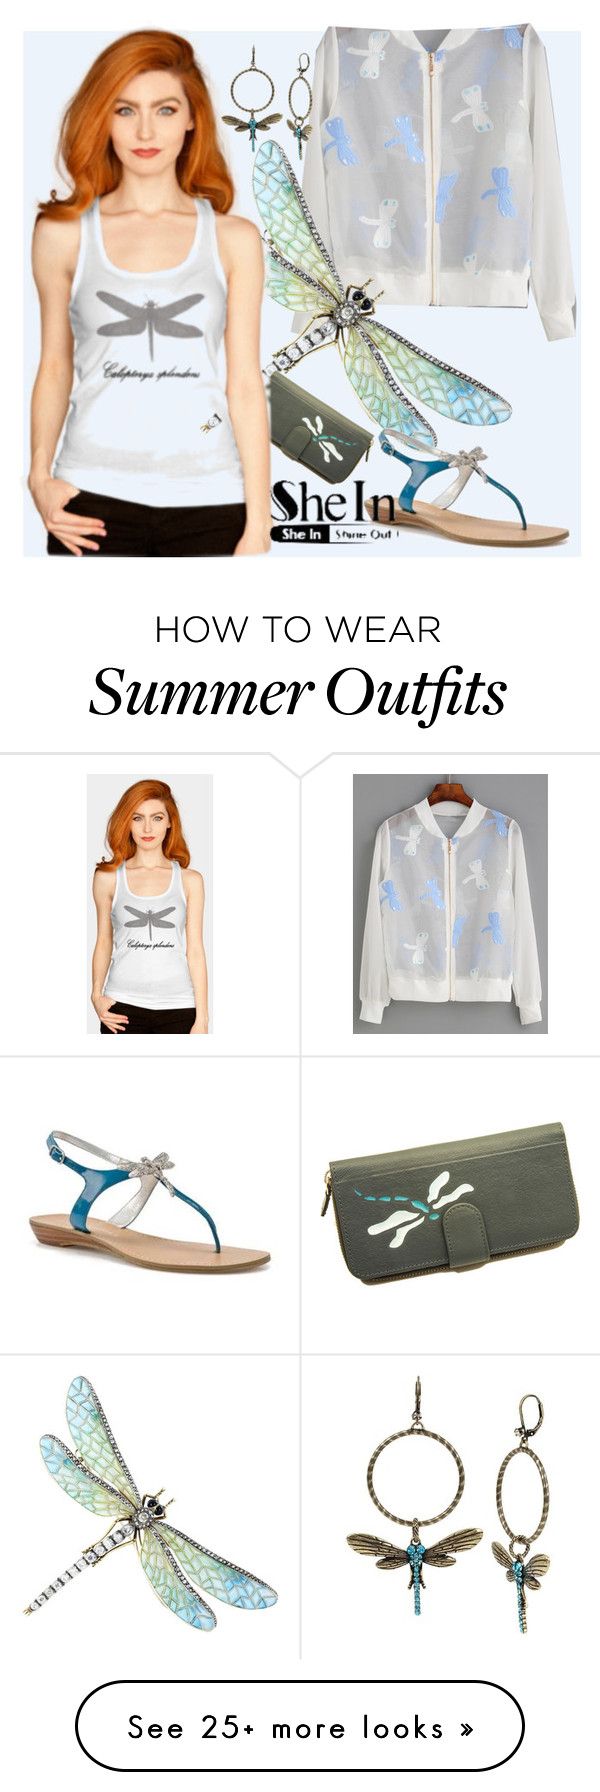 "SheIn Dragonfly Summer Outfit" by deborah-calton on Polyvore featurin...